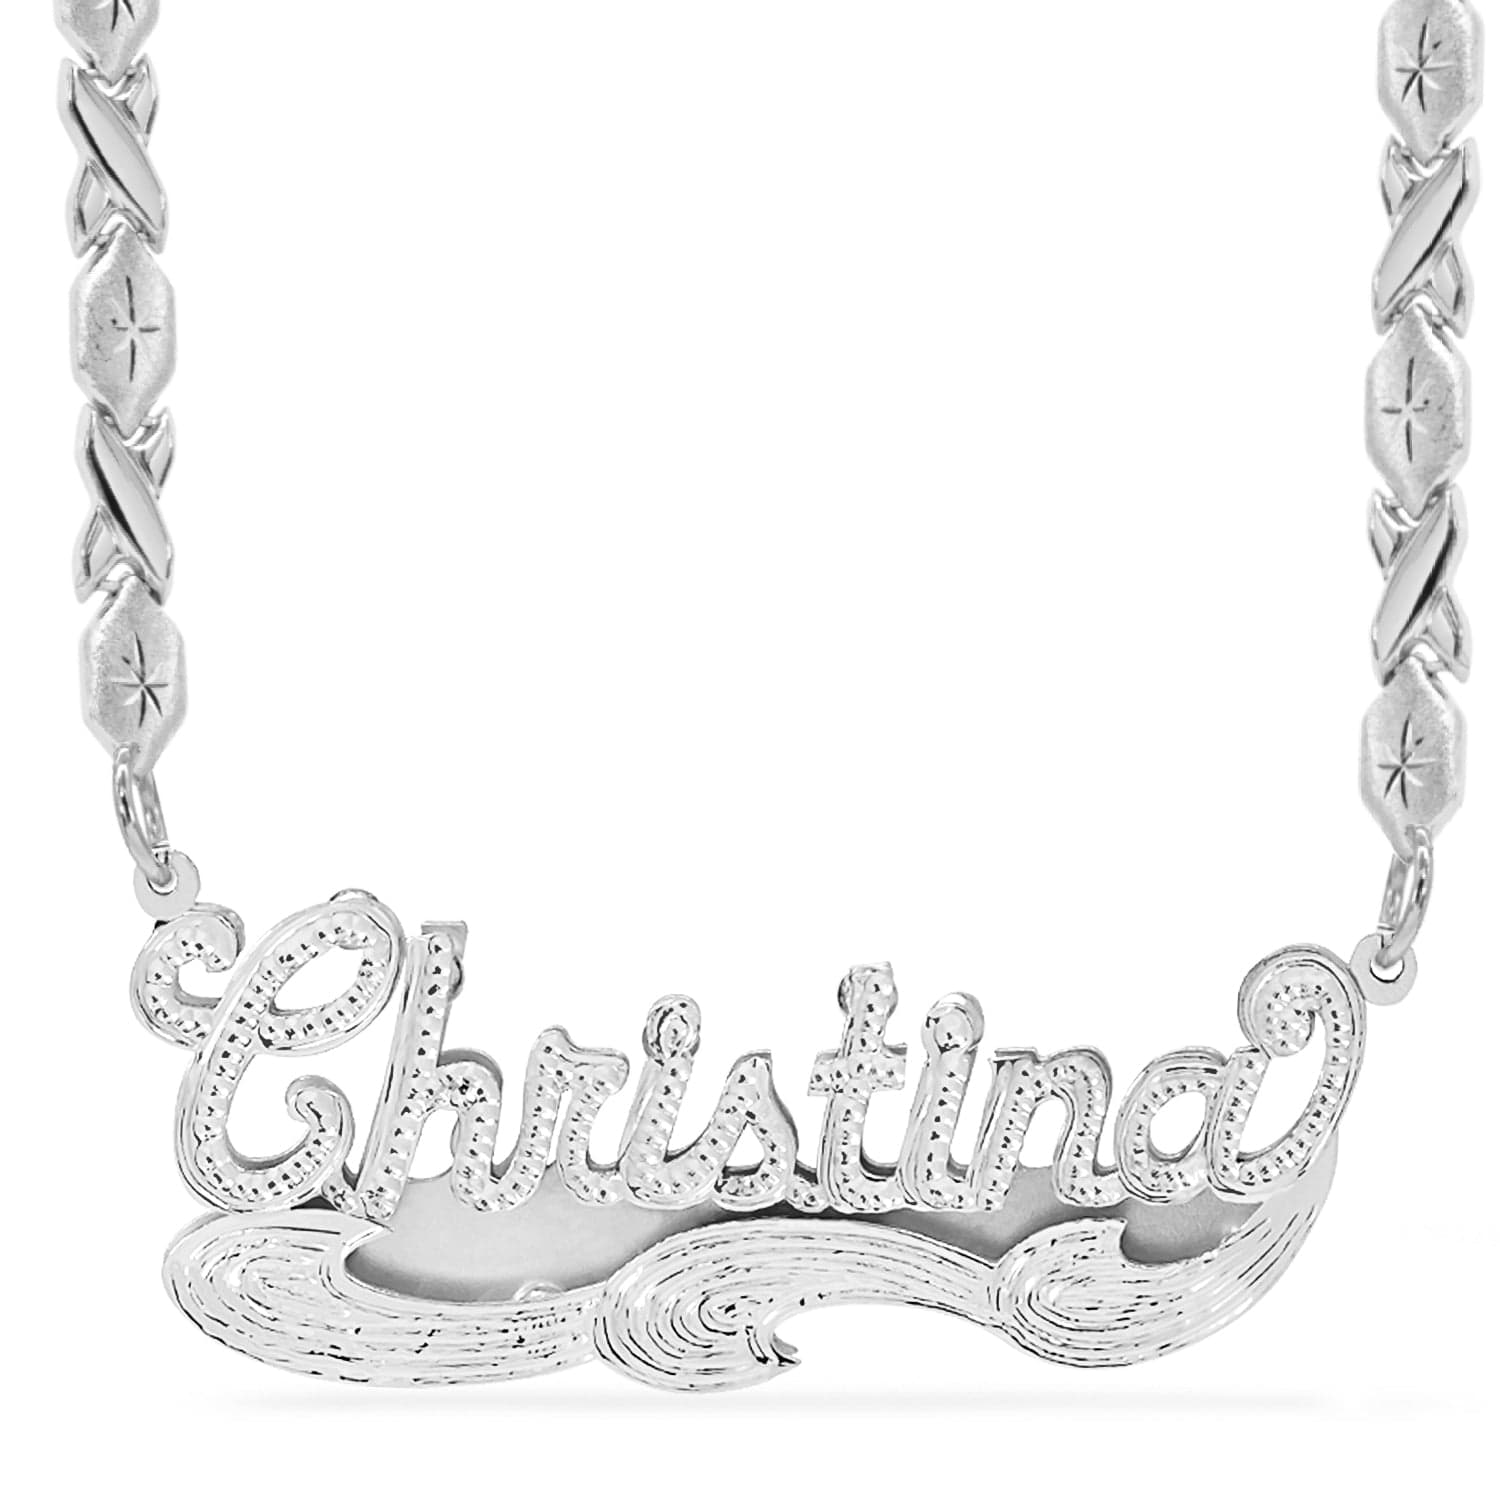 Two-Tone. Sterling Silver / Xoxo Chain Double Name Necklace w/Beading "Christina" with Xoxo chain